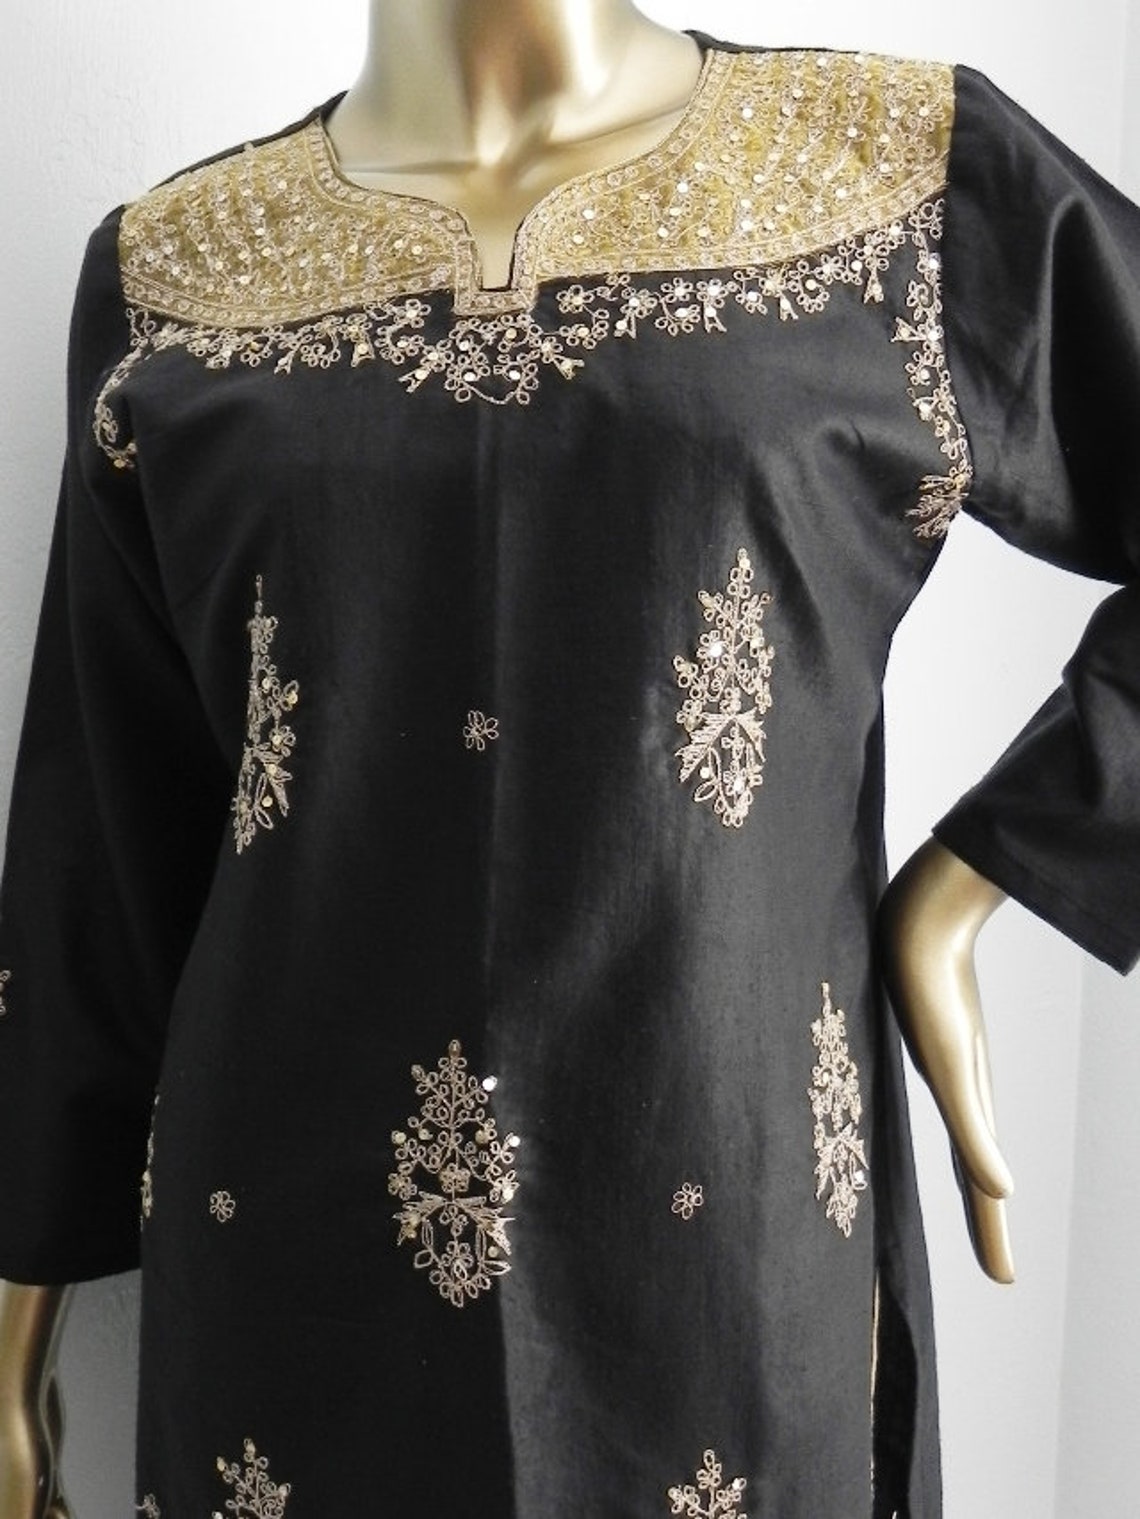 Vintage black and gold embroidered tunic ethnic dress | Etsy